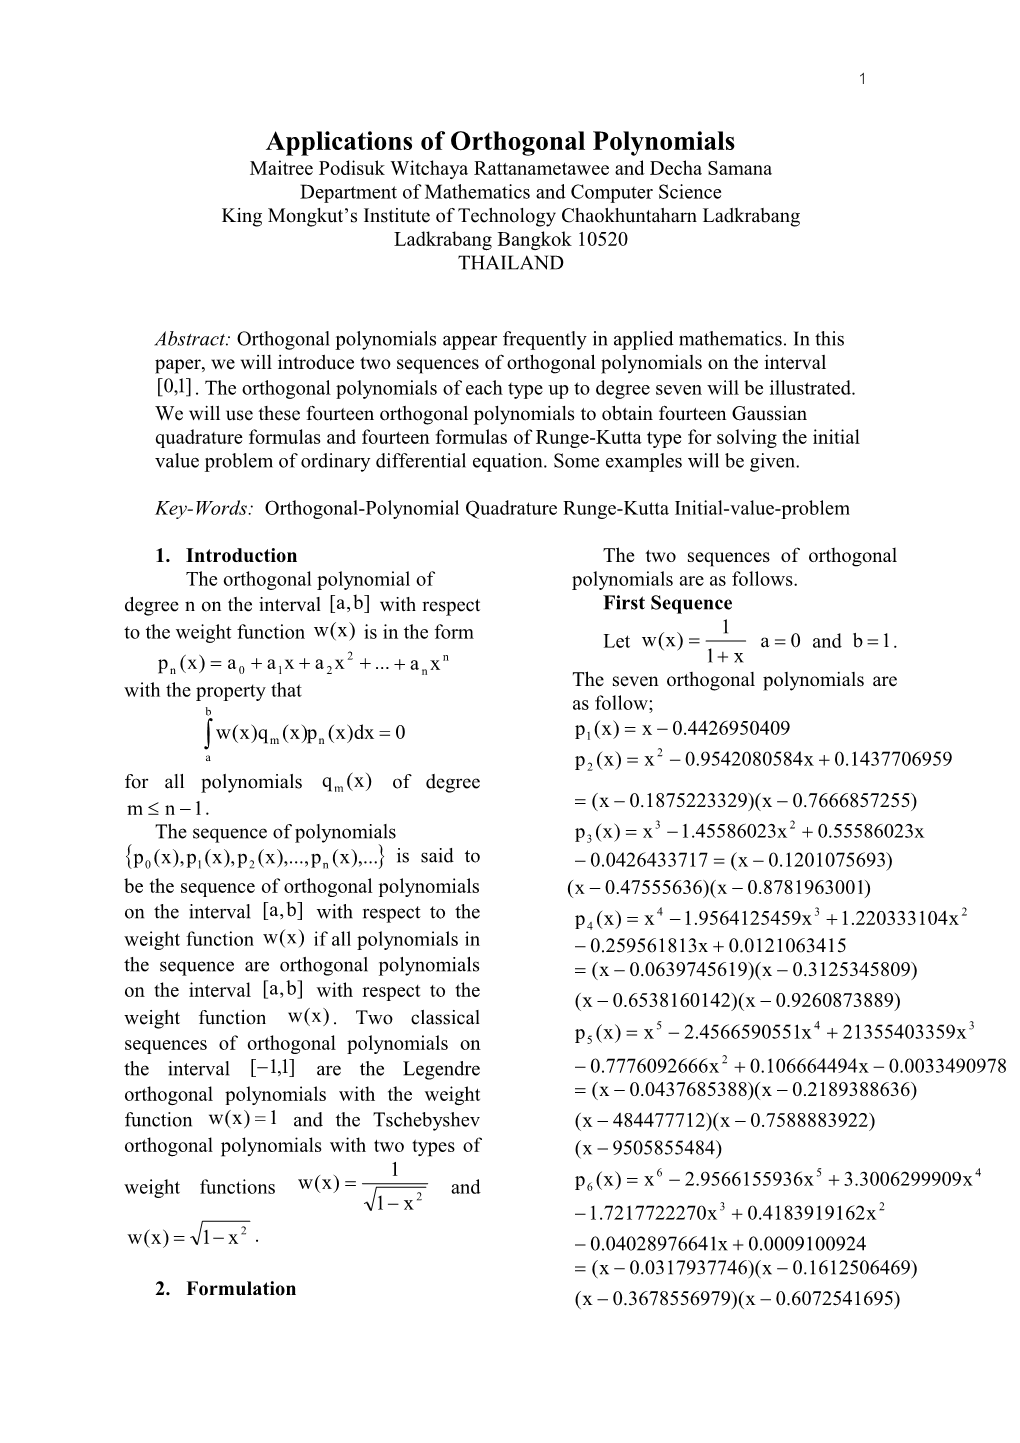 Sequence of Orthogonal Polynomials and Their Application